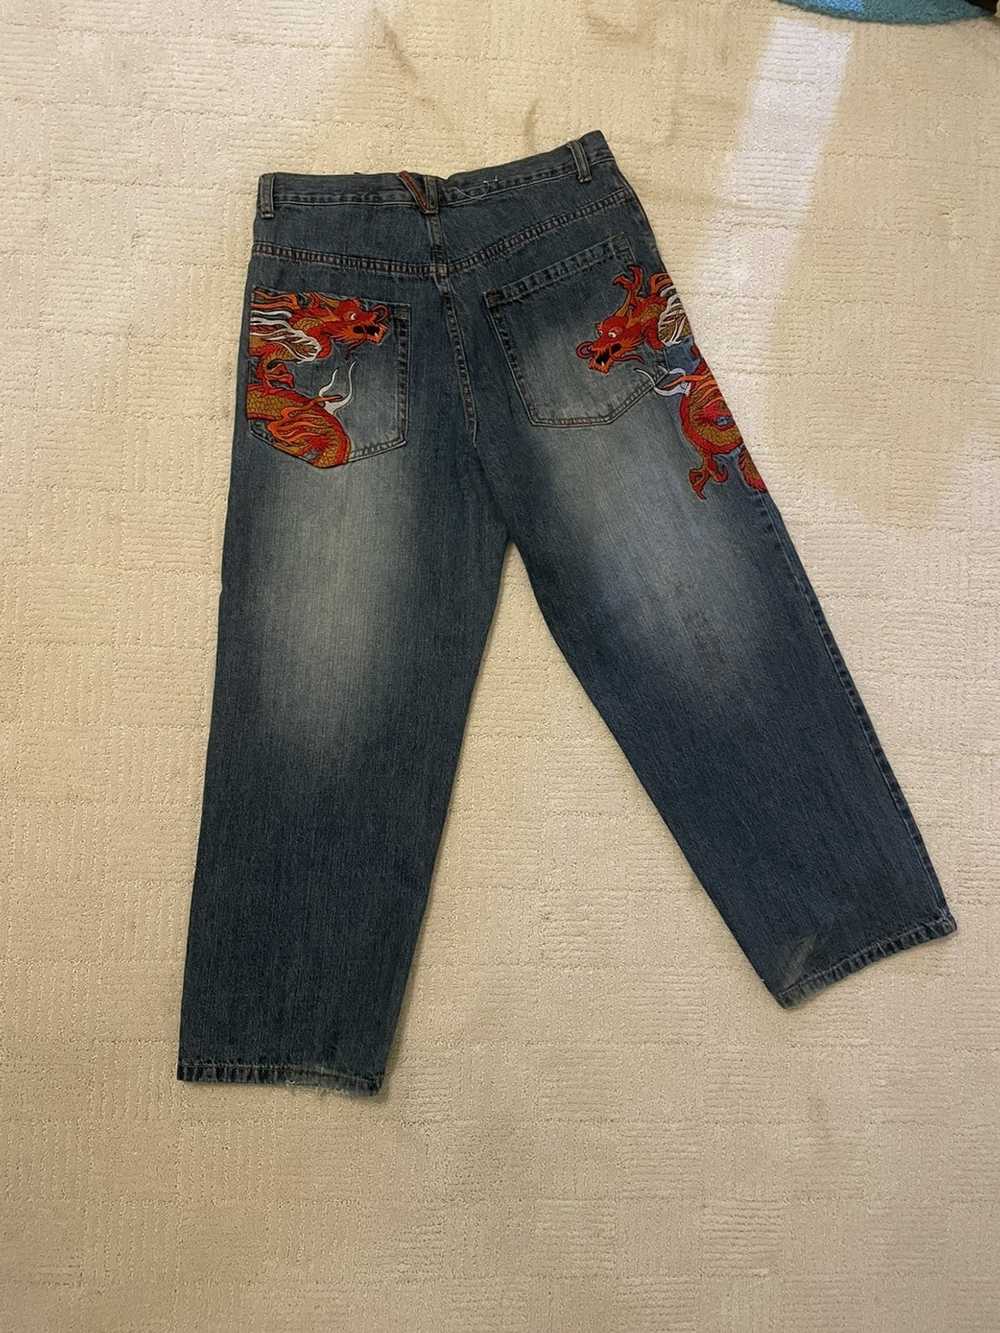 Streetwear × Vintage Dragon embroidered jeans - image 5